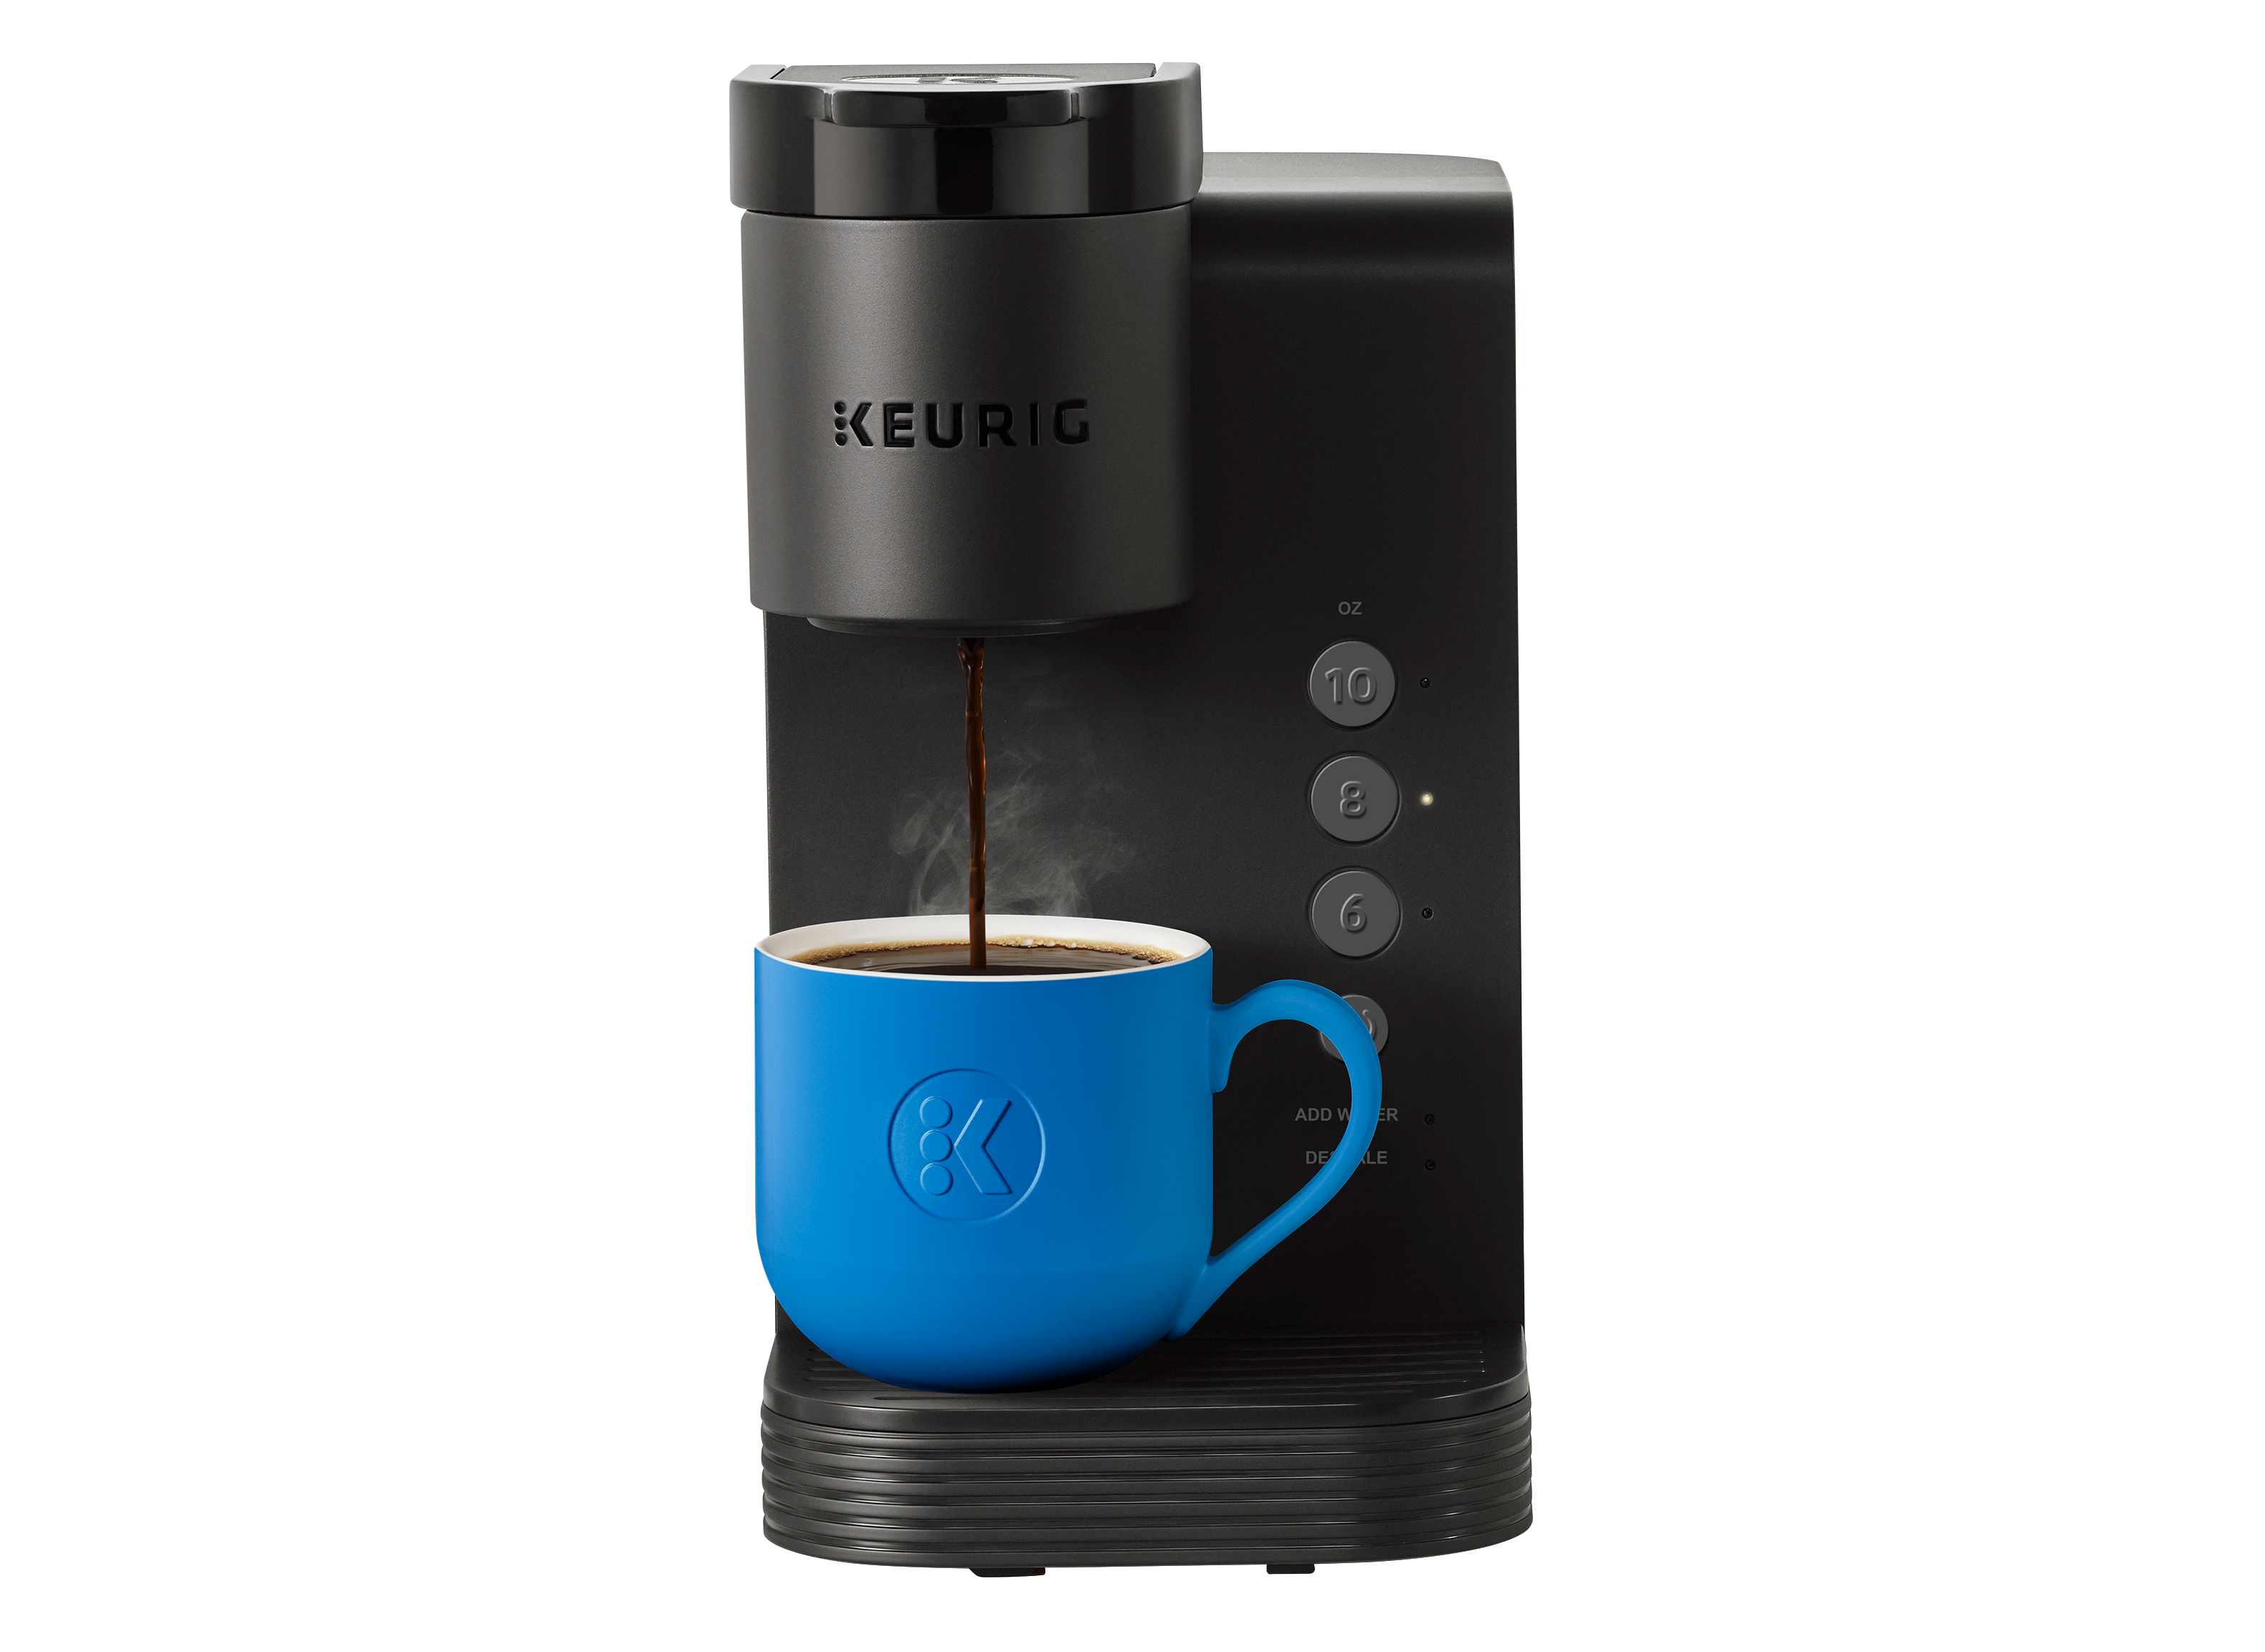 iCoffee Express RSS100-EXP Coffee Maker Review - Consumer Reports